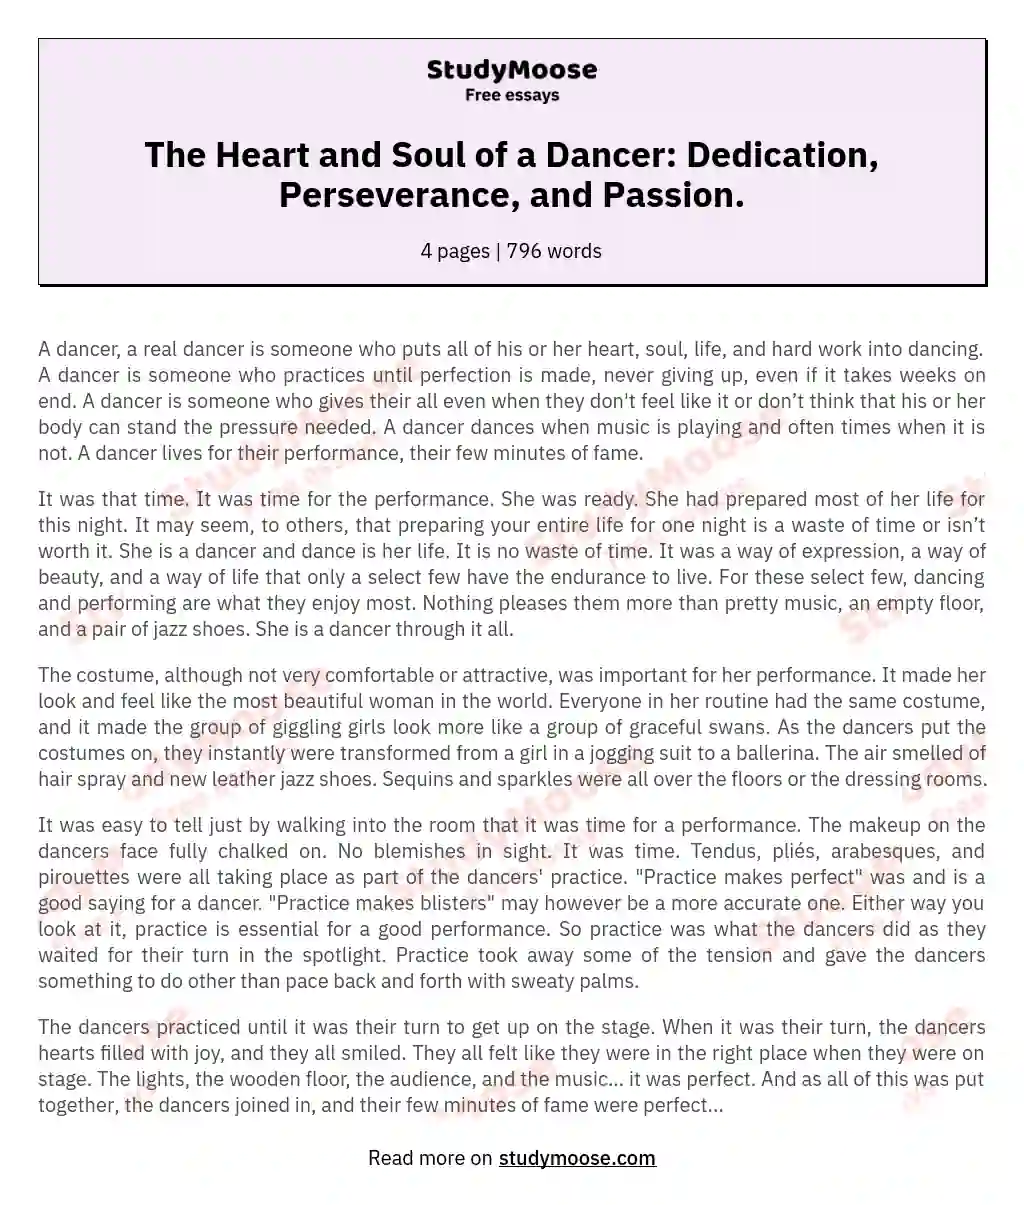 The Heart and Soul of a Dancer: Dedication, Perseverance, and Passion.